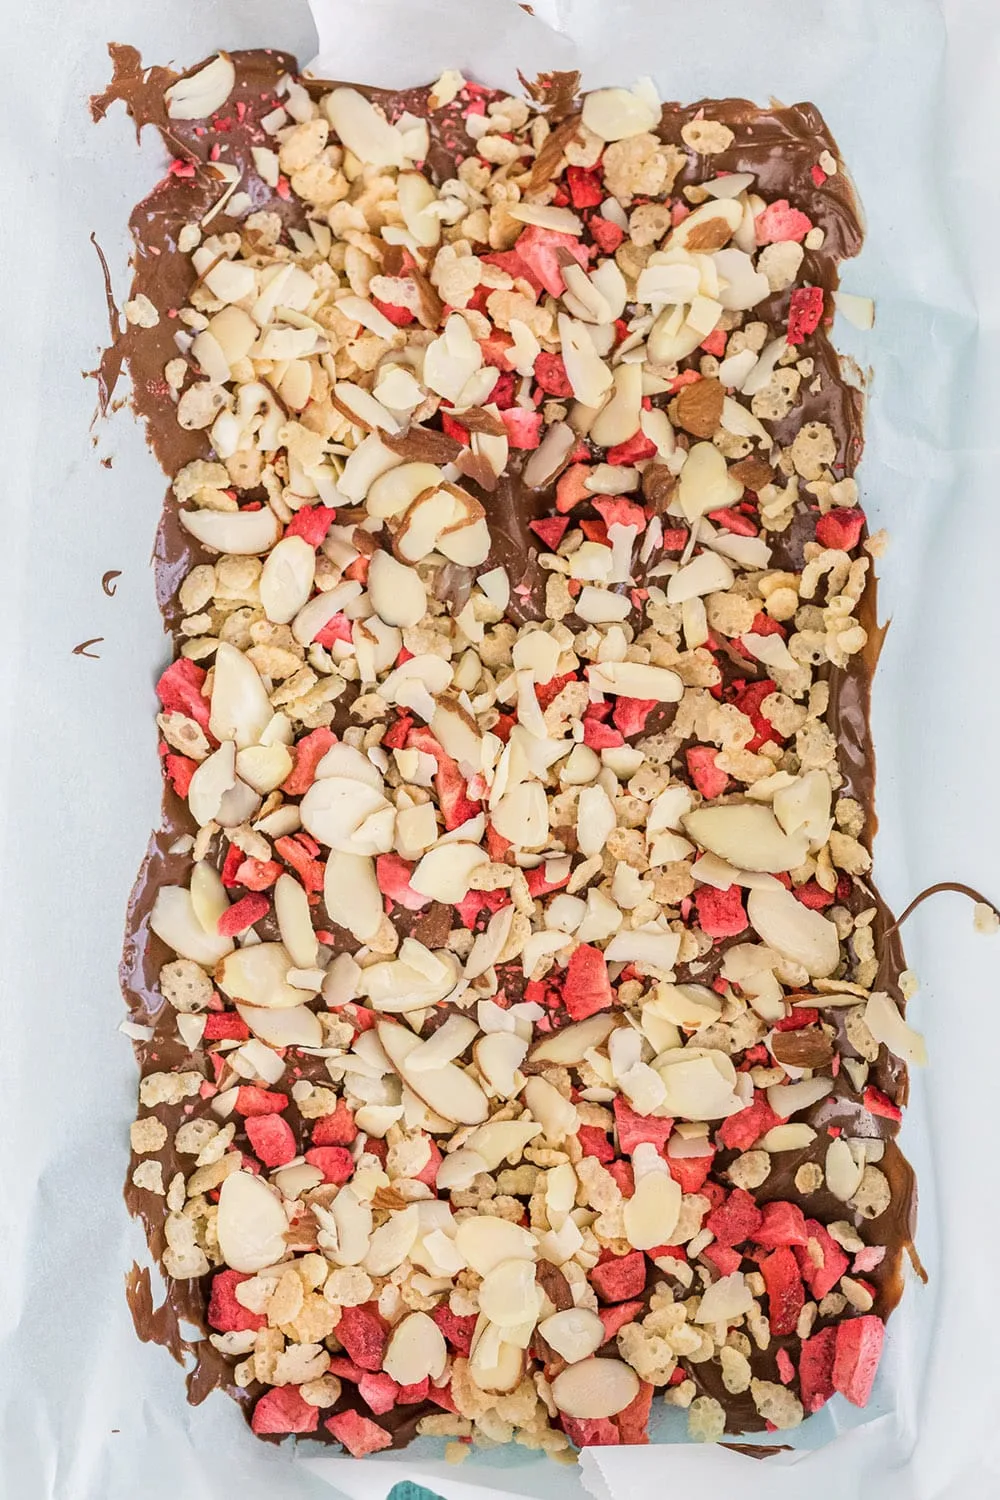 Chocolate bark candy with almonds and strawberries in a pan.